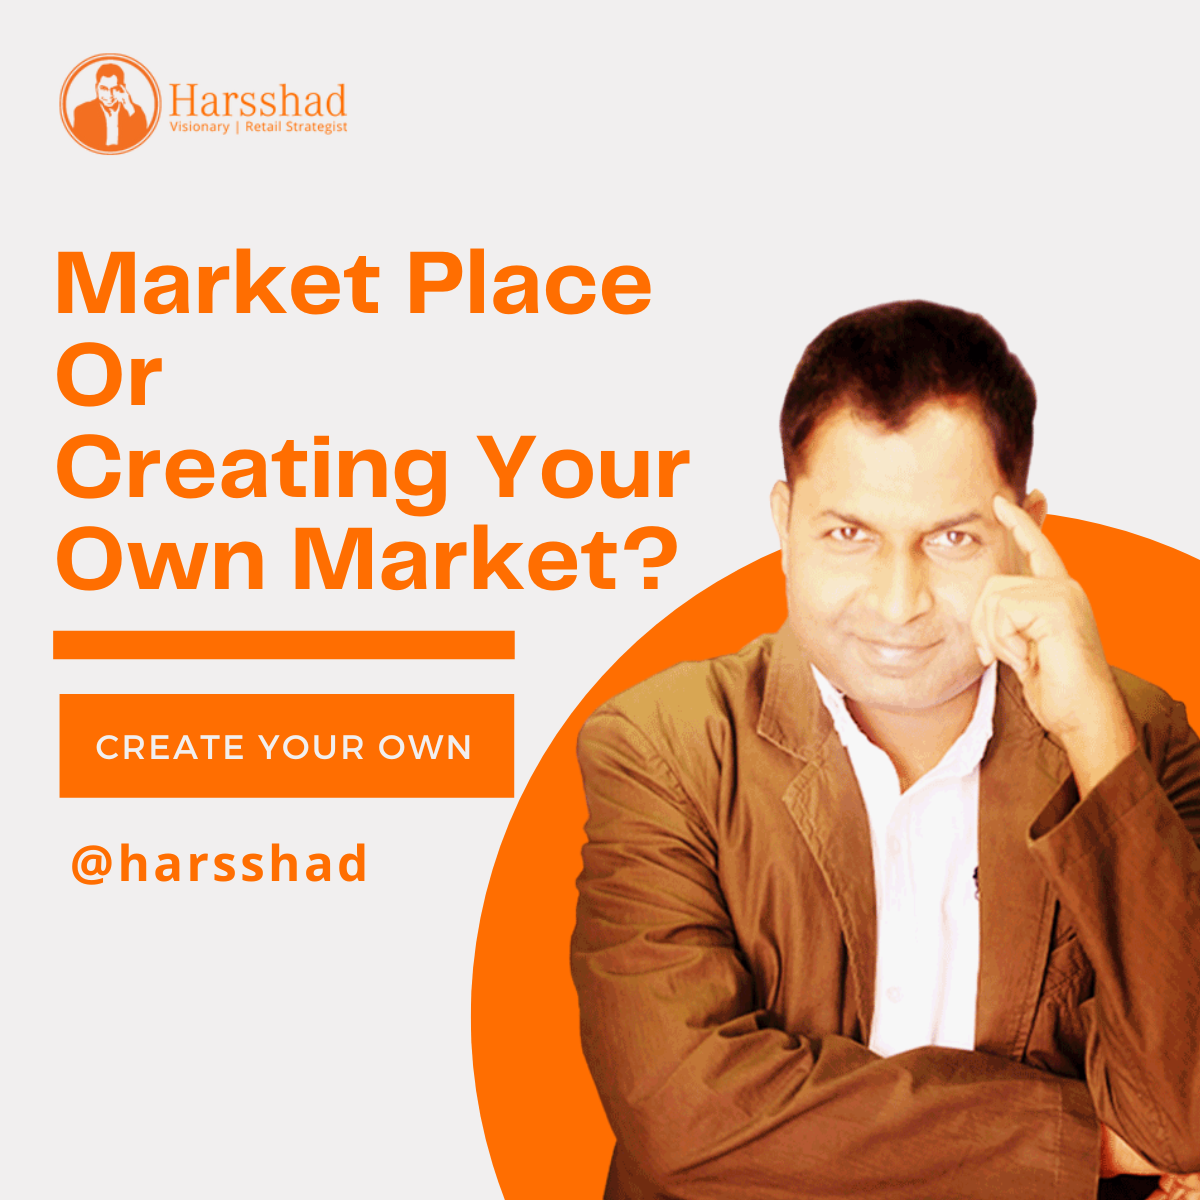 Market Place Or Your Own Market by Harsshad